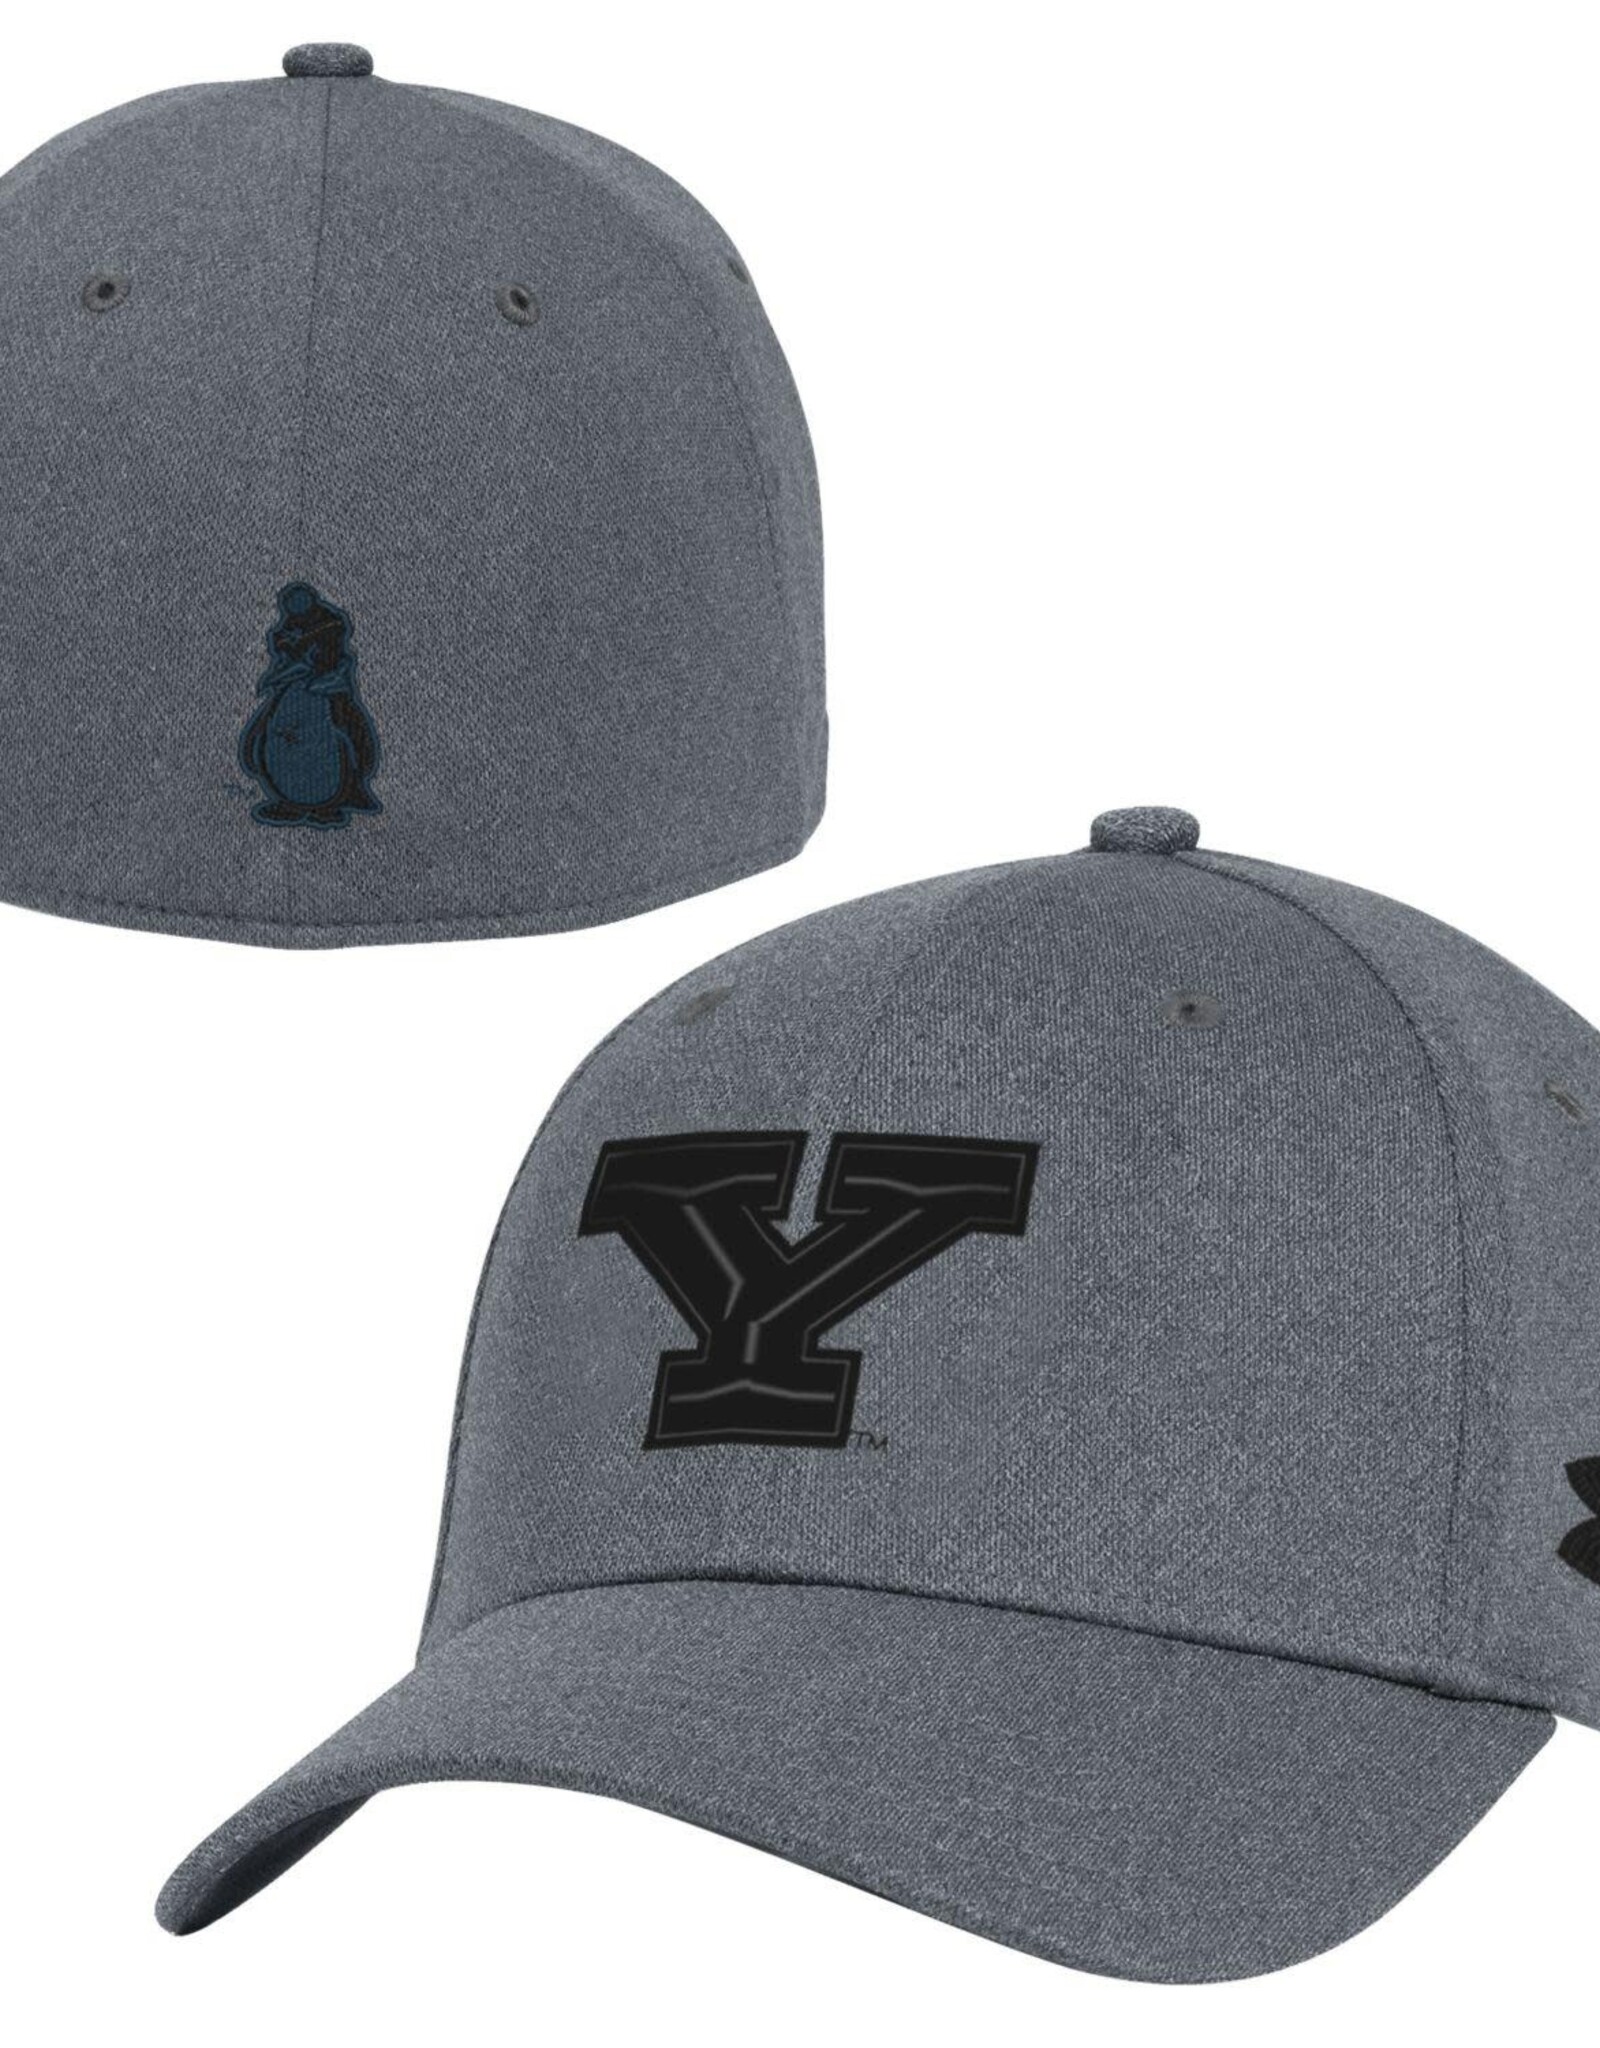 Under Armour Youngstown State Penguins GREY Blitzing Stretch Fit Cap - Black Y Logo / Black Pete Back